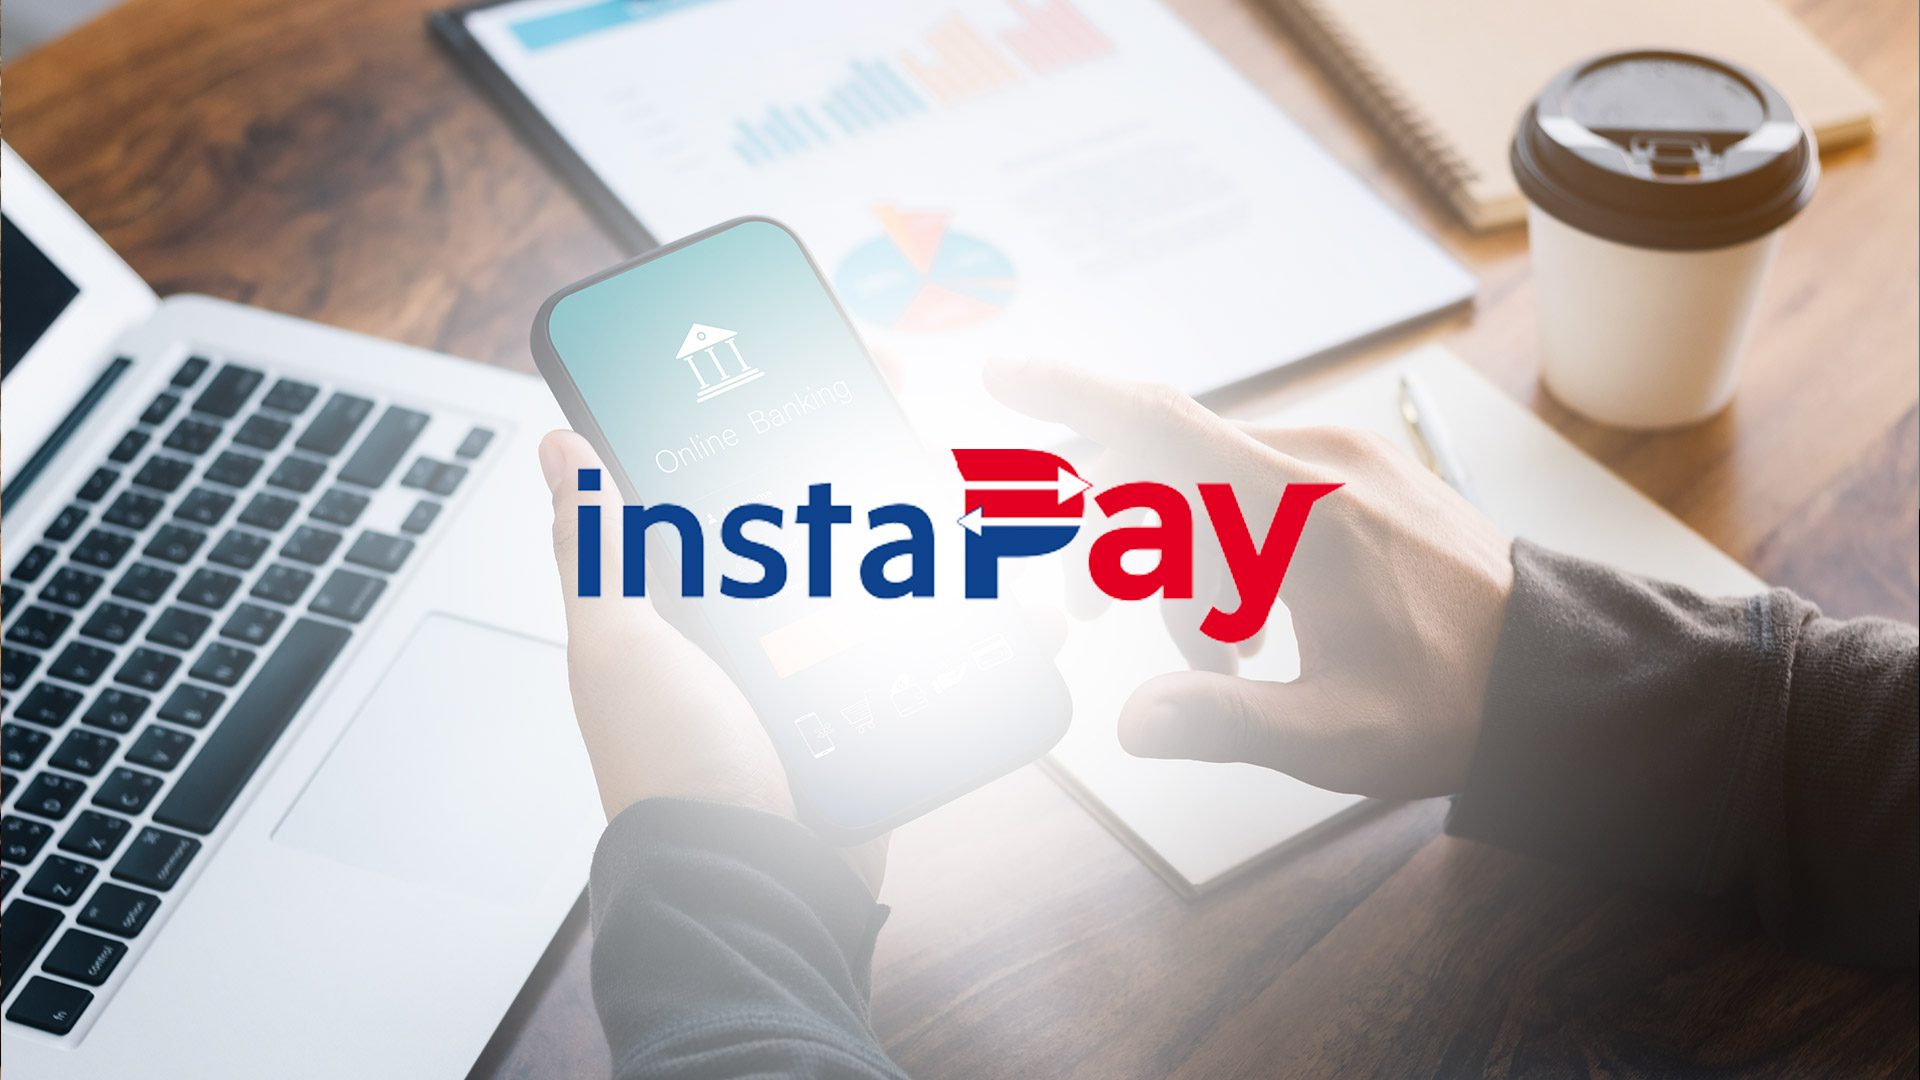 Delays in InstaPay transactions caused by ‘system upgrade,’ say banks